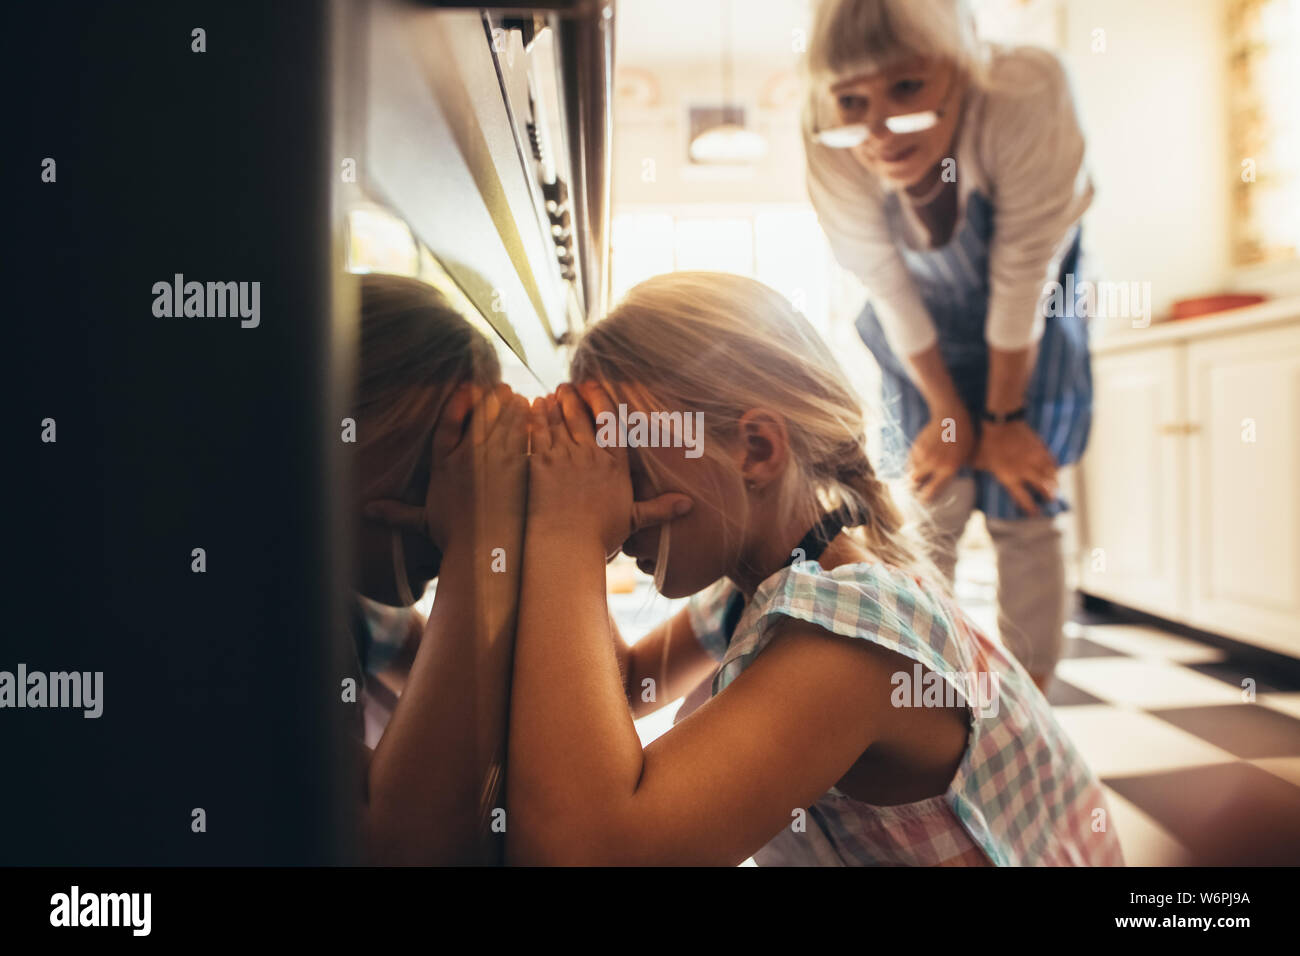 Close up of a girl looking inside an oven through the glass door. Granny and kid in kitchen looking for cake inside the oven. Stock Photo